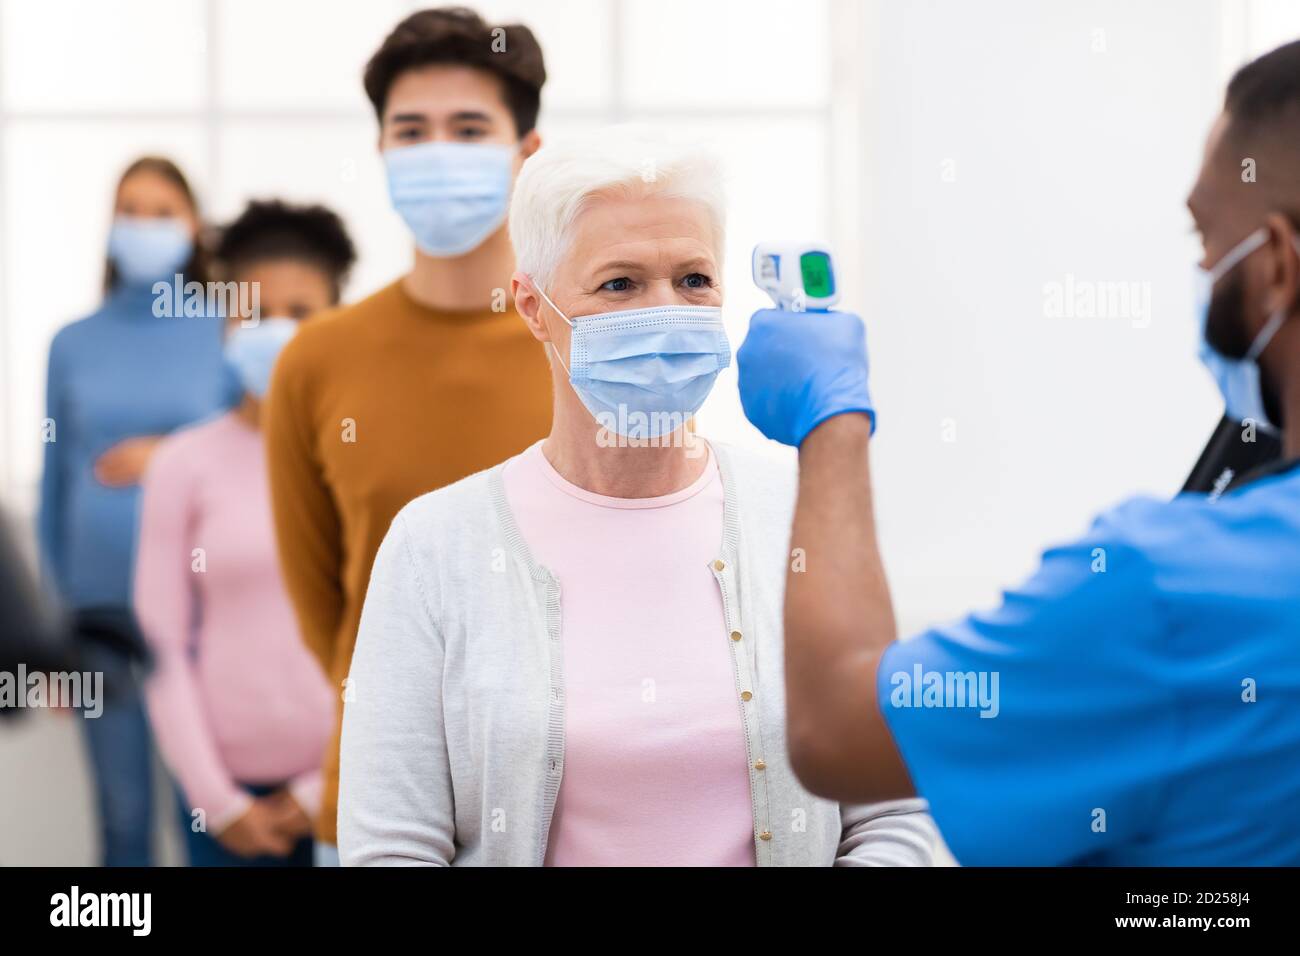 Worker Doing Temperature Screening Scanning Lady's Forehead With Themometer Indoors Stock Photo